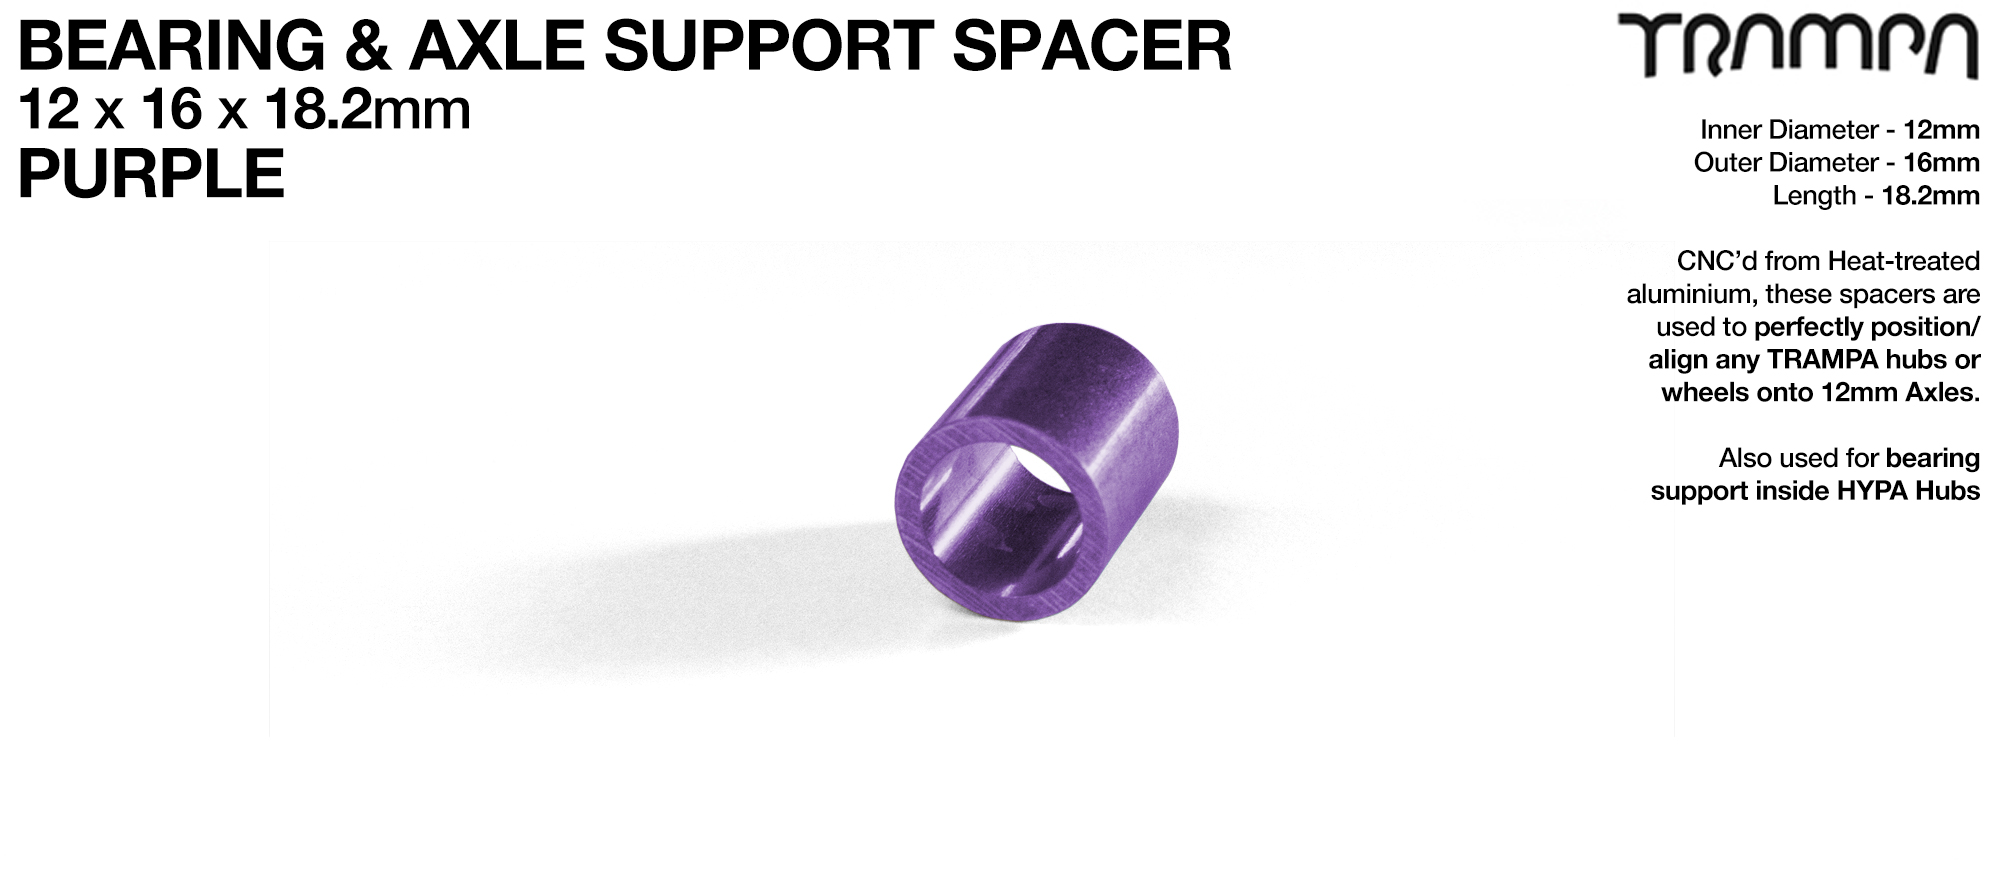 Wheel support spacer for all TRAMPA Wheels on 12mm ATB Axles - CNC precision 12mm x 16mm x 18.2mm  - PURPLE